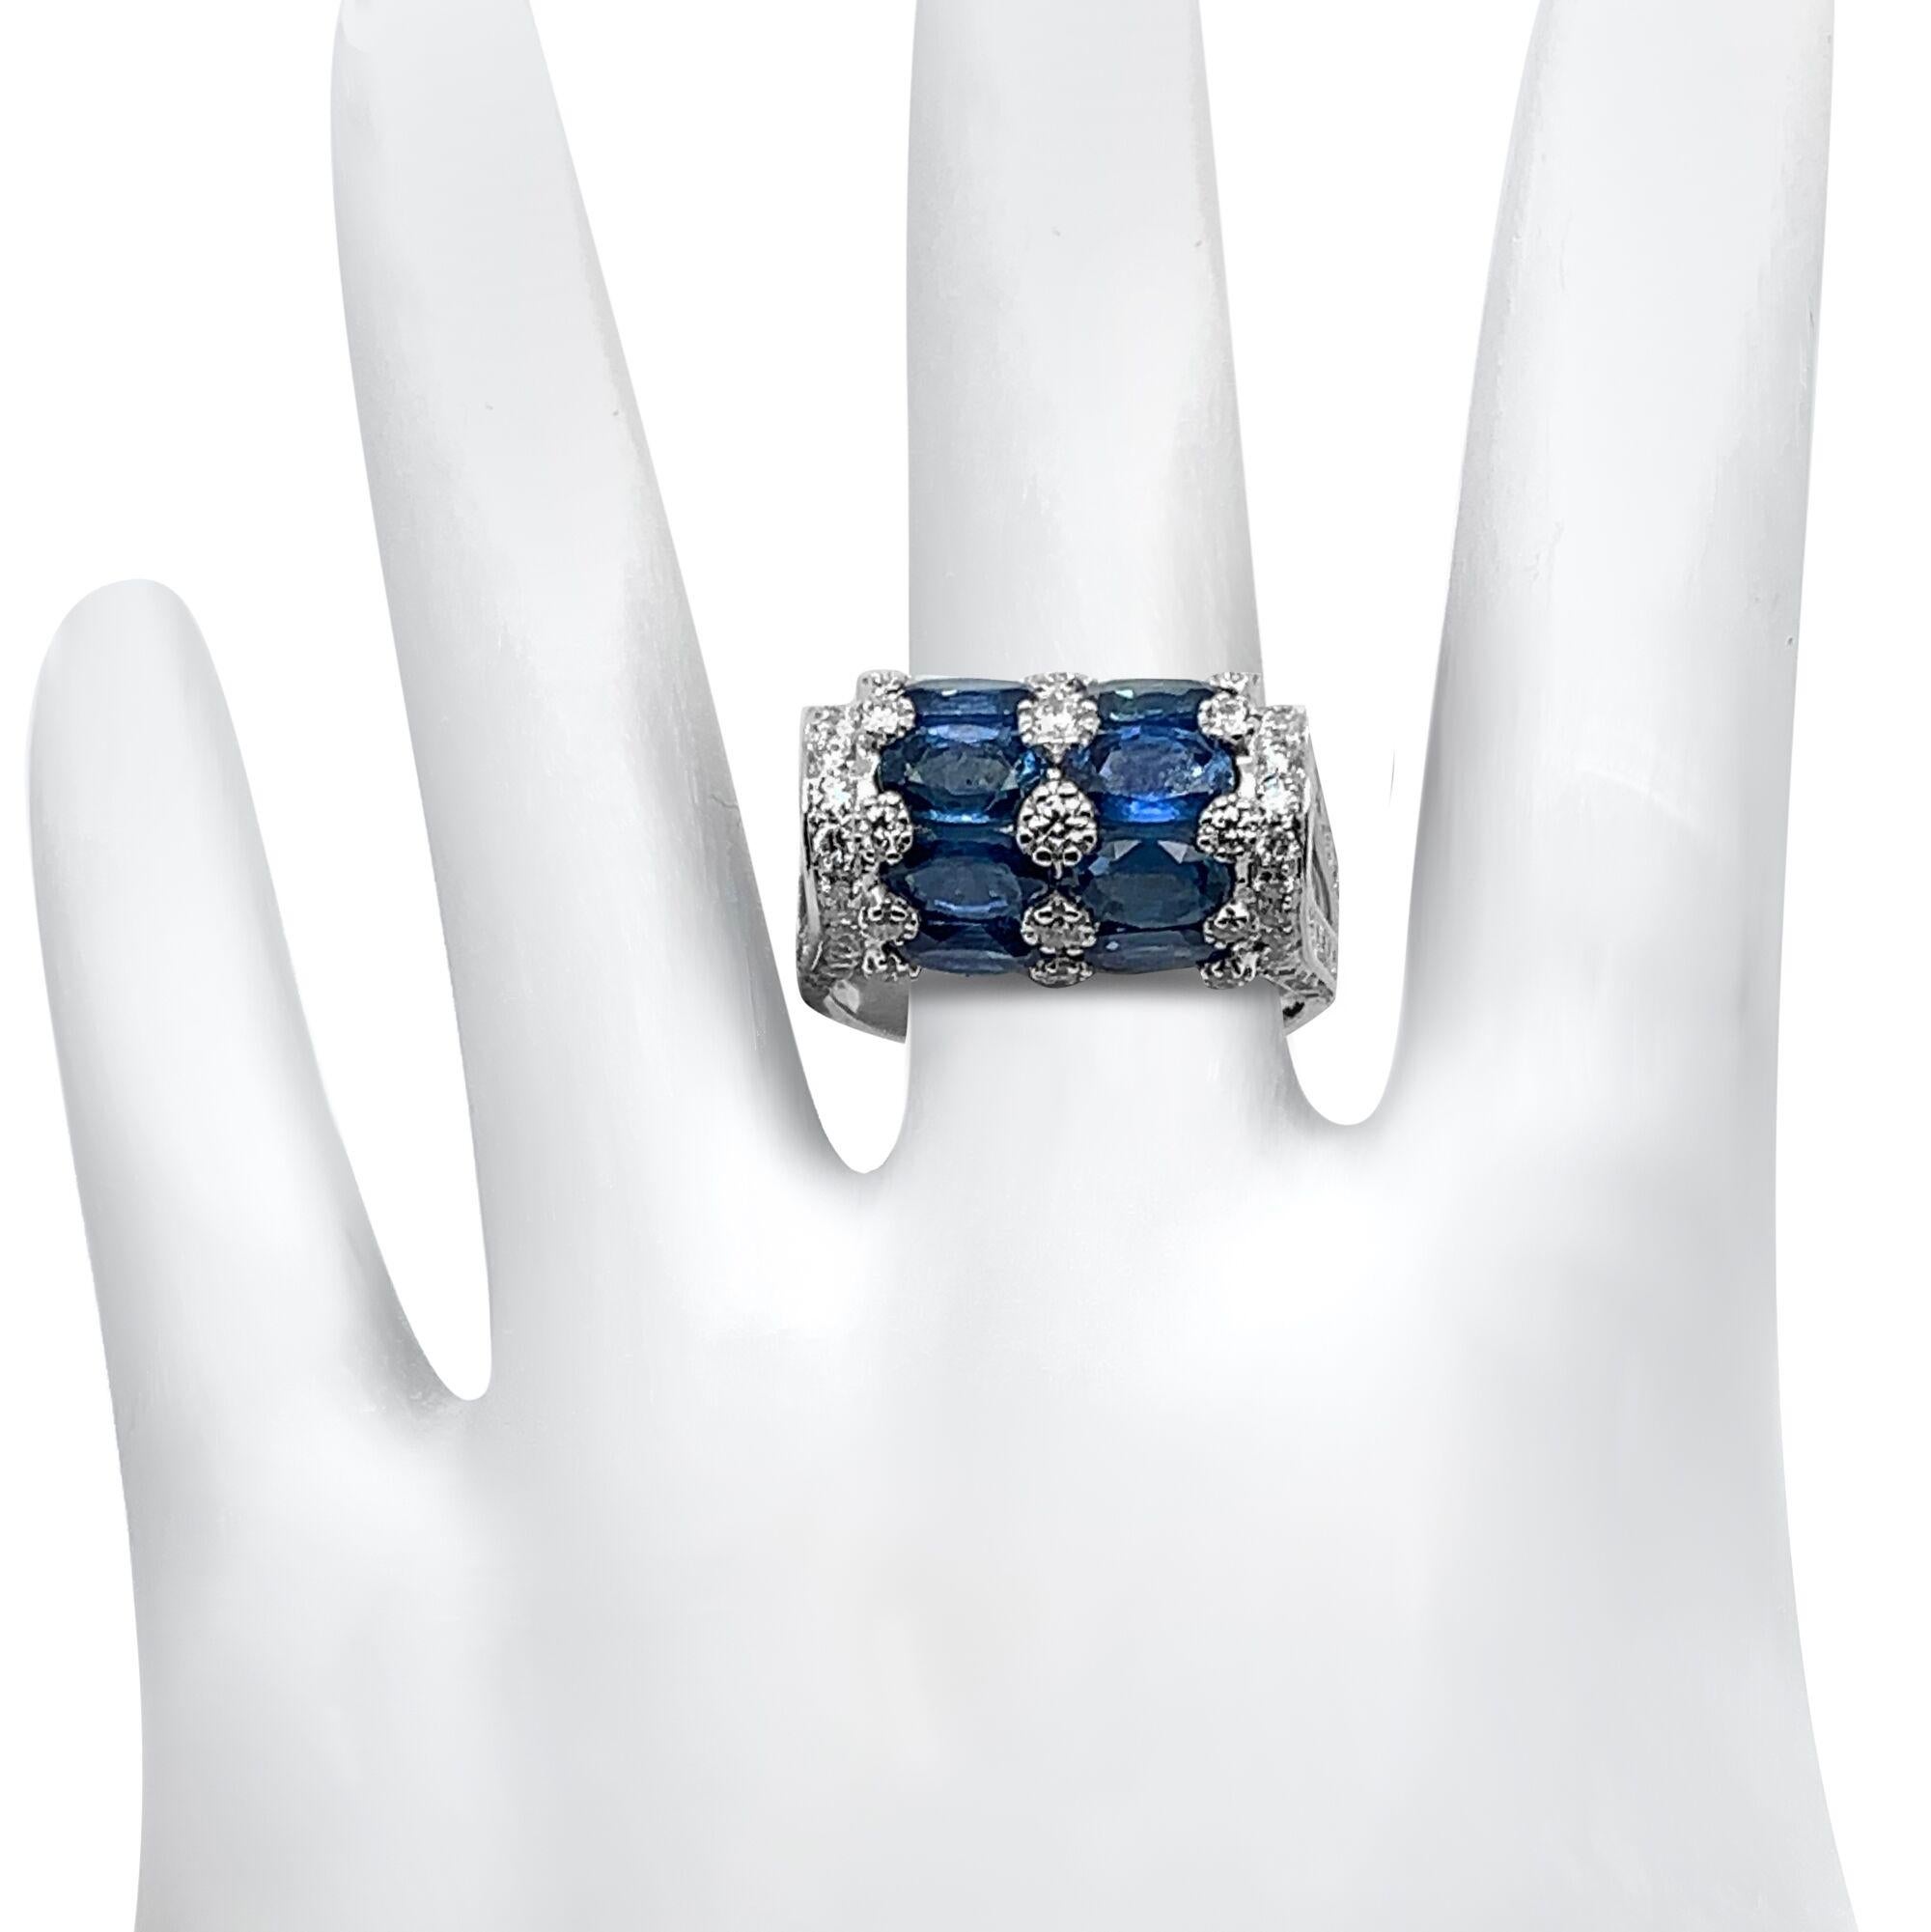 18 Karat White Gold Diamond and Sapphire Ring For Sale 2